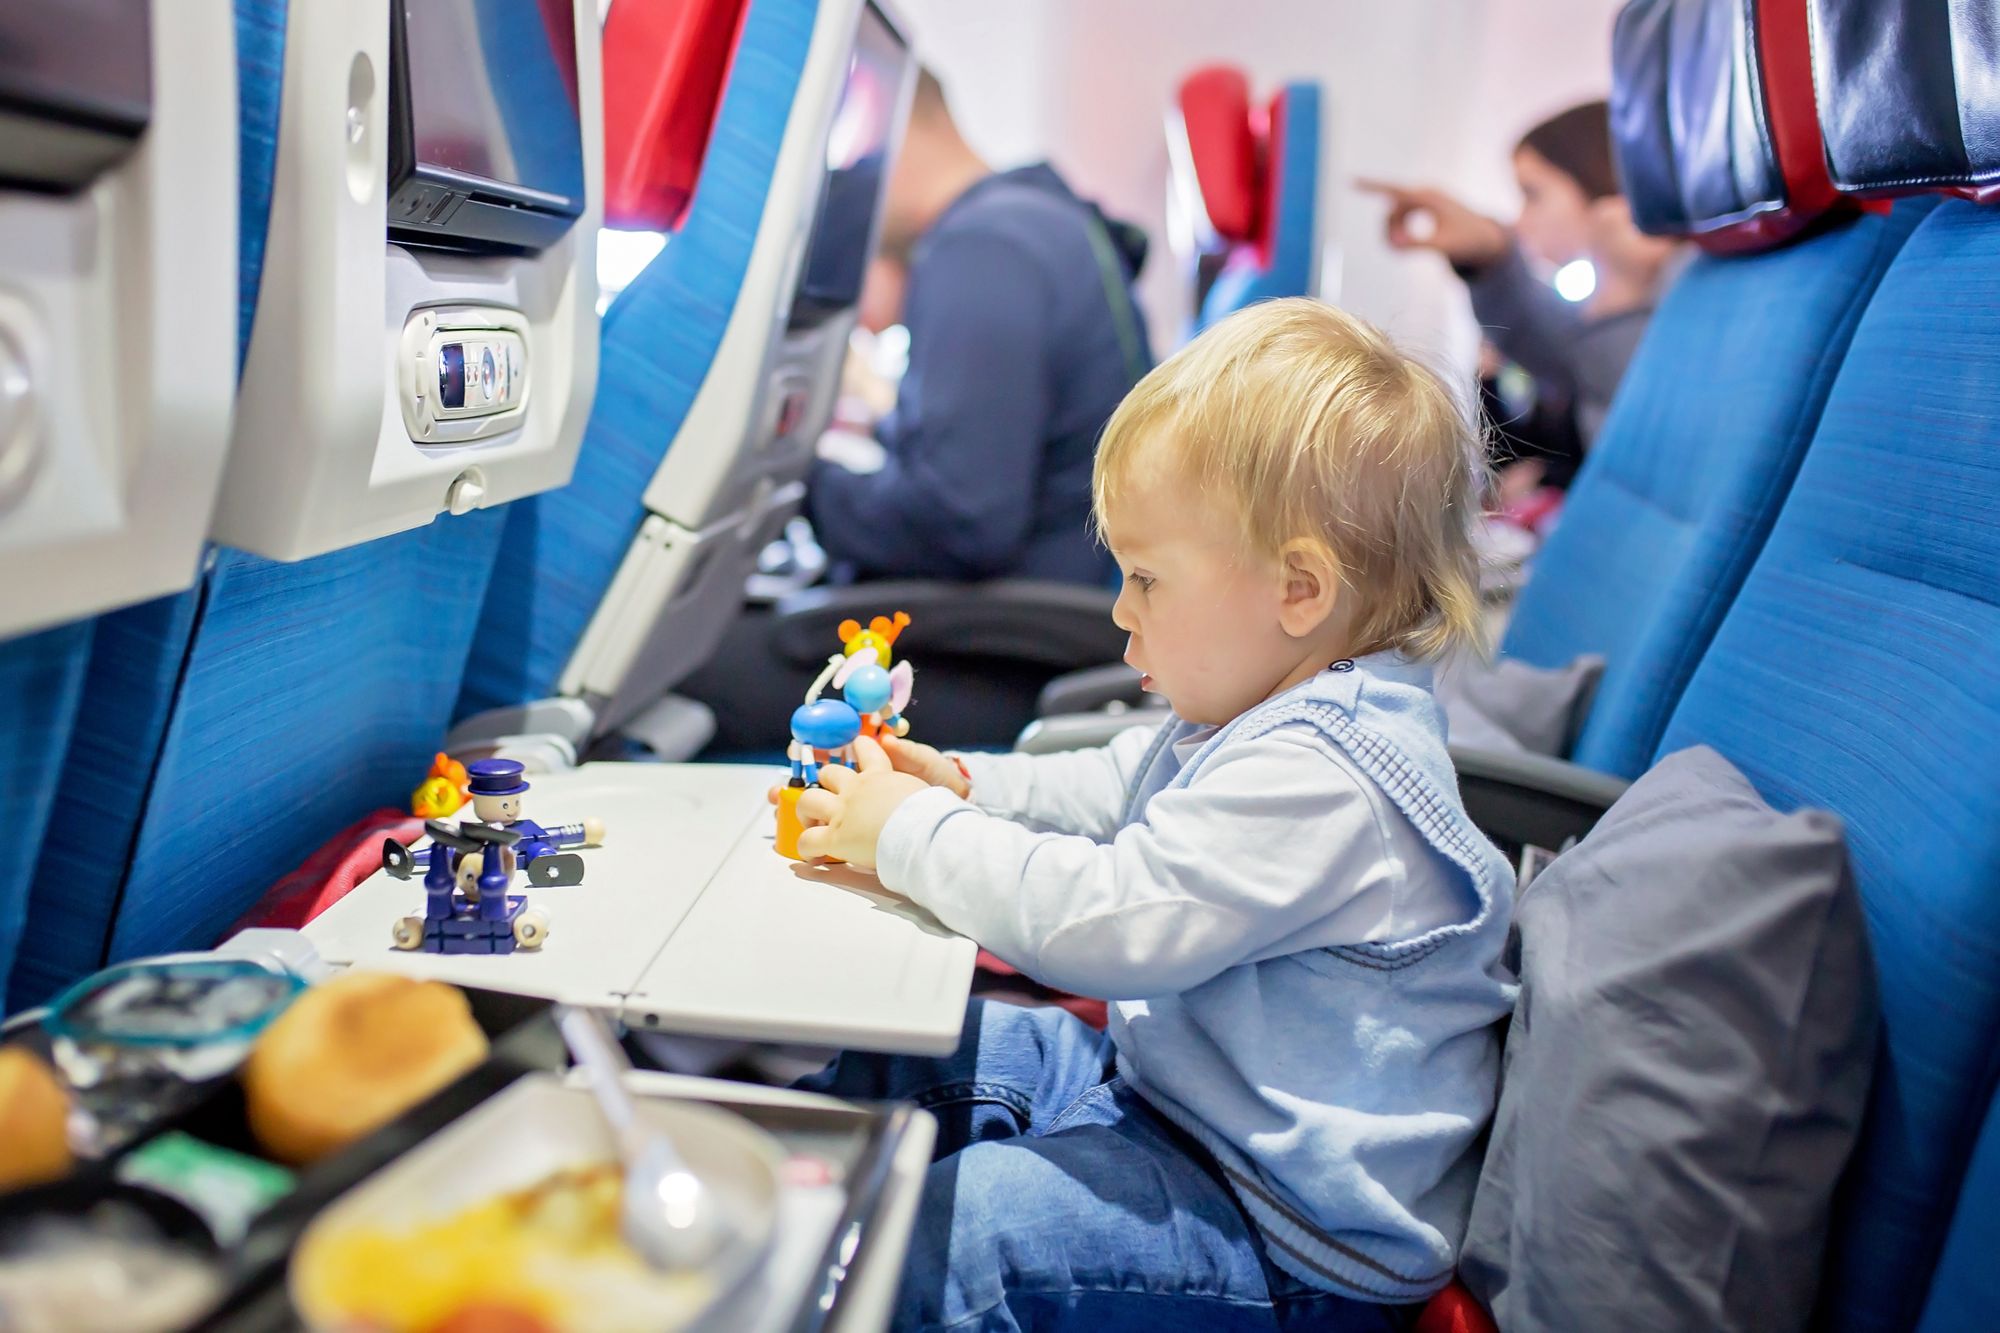 9 best games to play on an airplane to keep boredom at bay - Tripadvisor